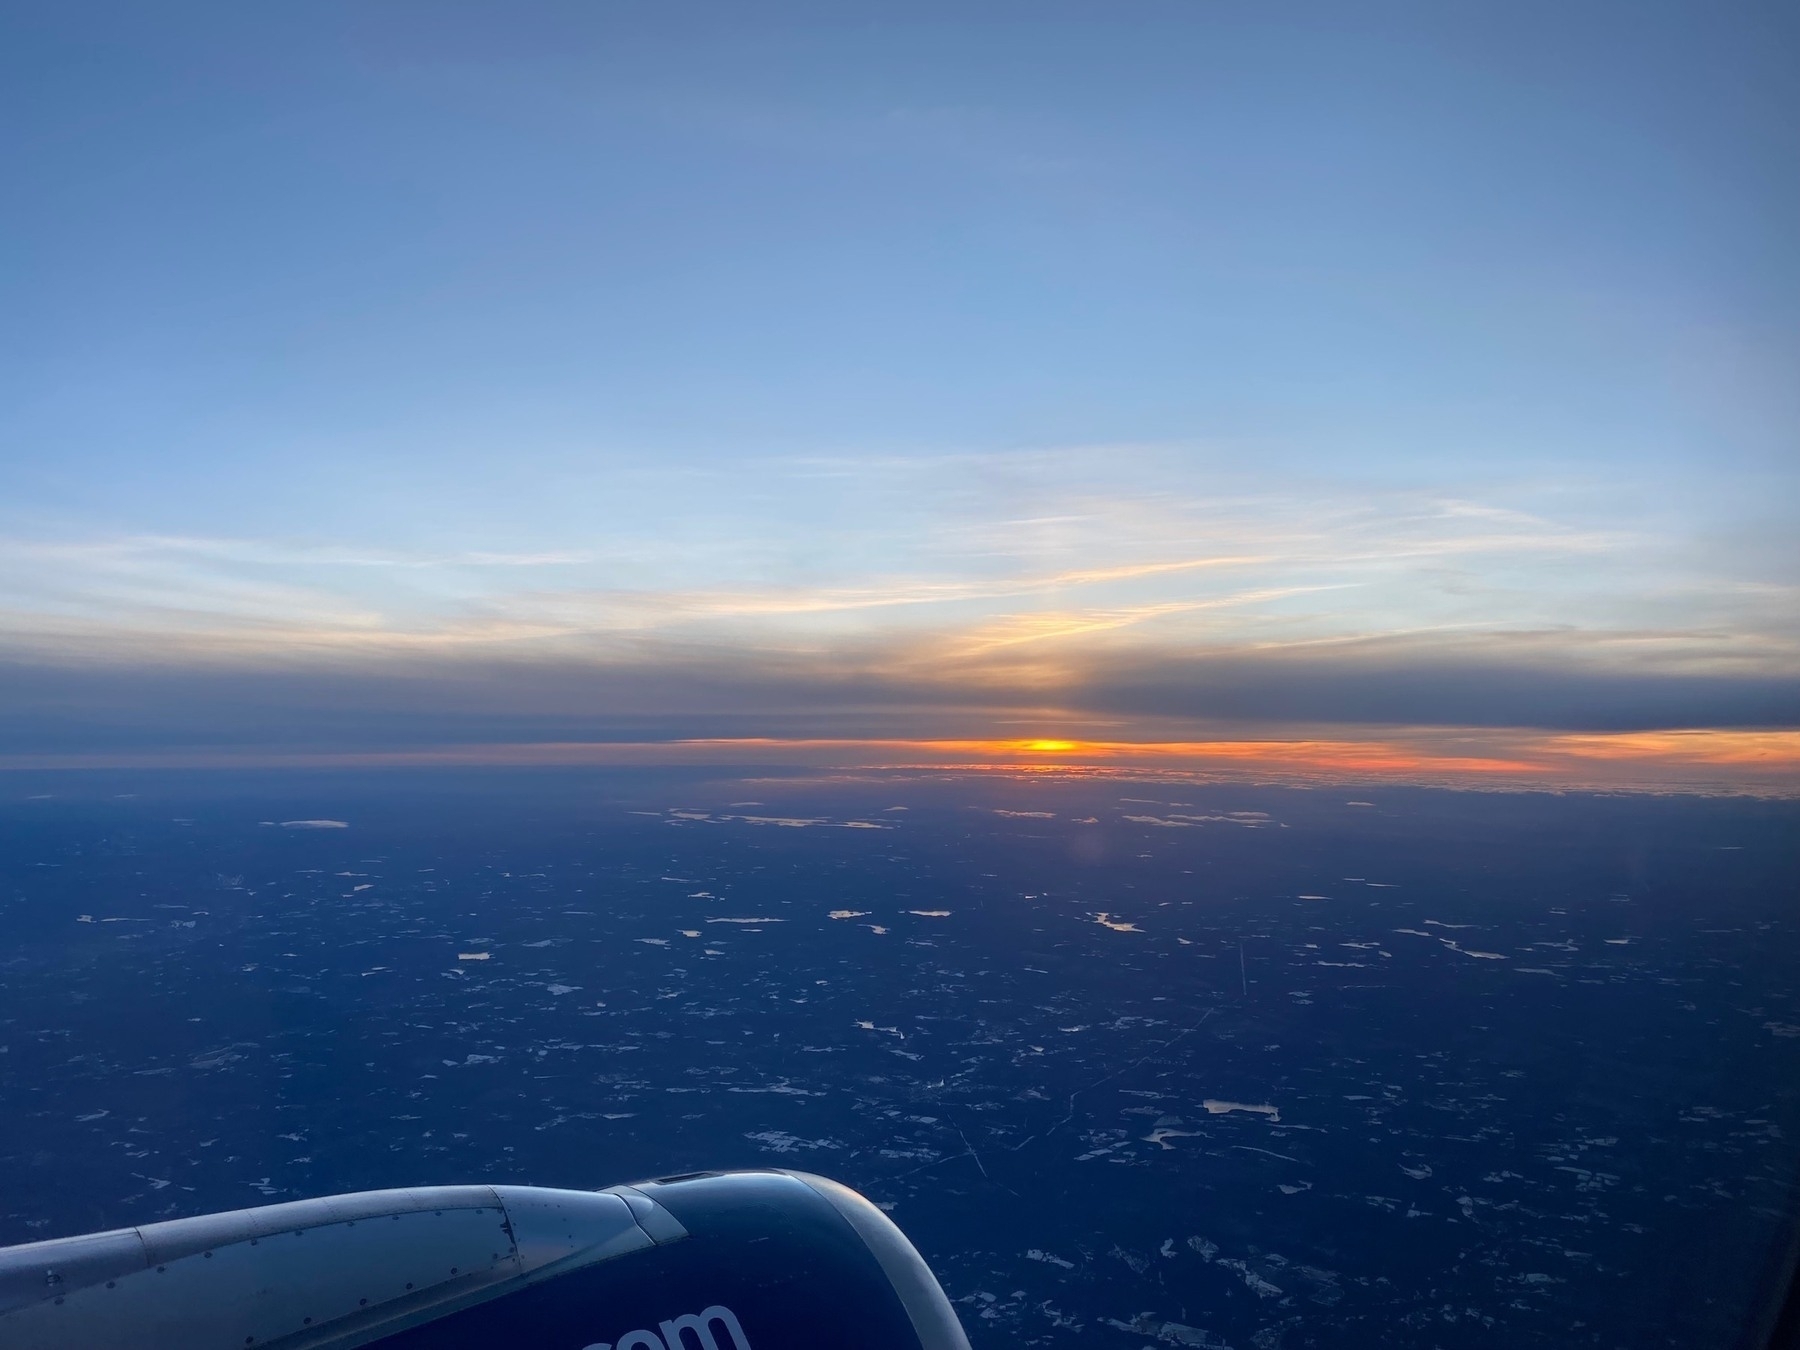 View of a sunset from a plane window.